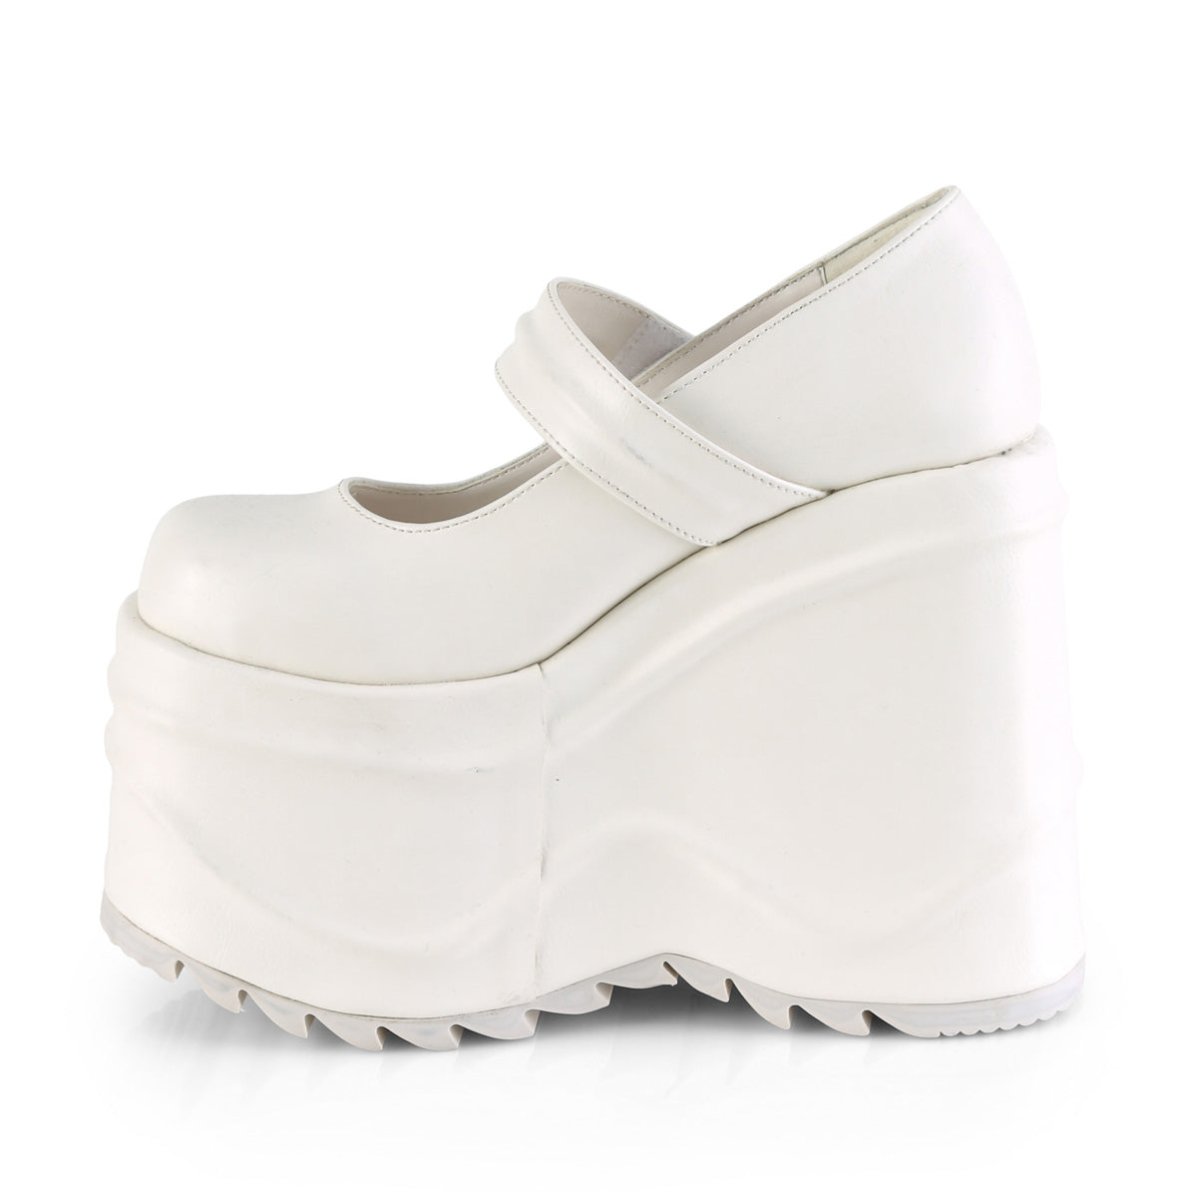 Too Fast | Demonia Wave 32 | White Vegan Leather Women's Mary Janes